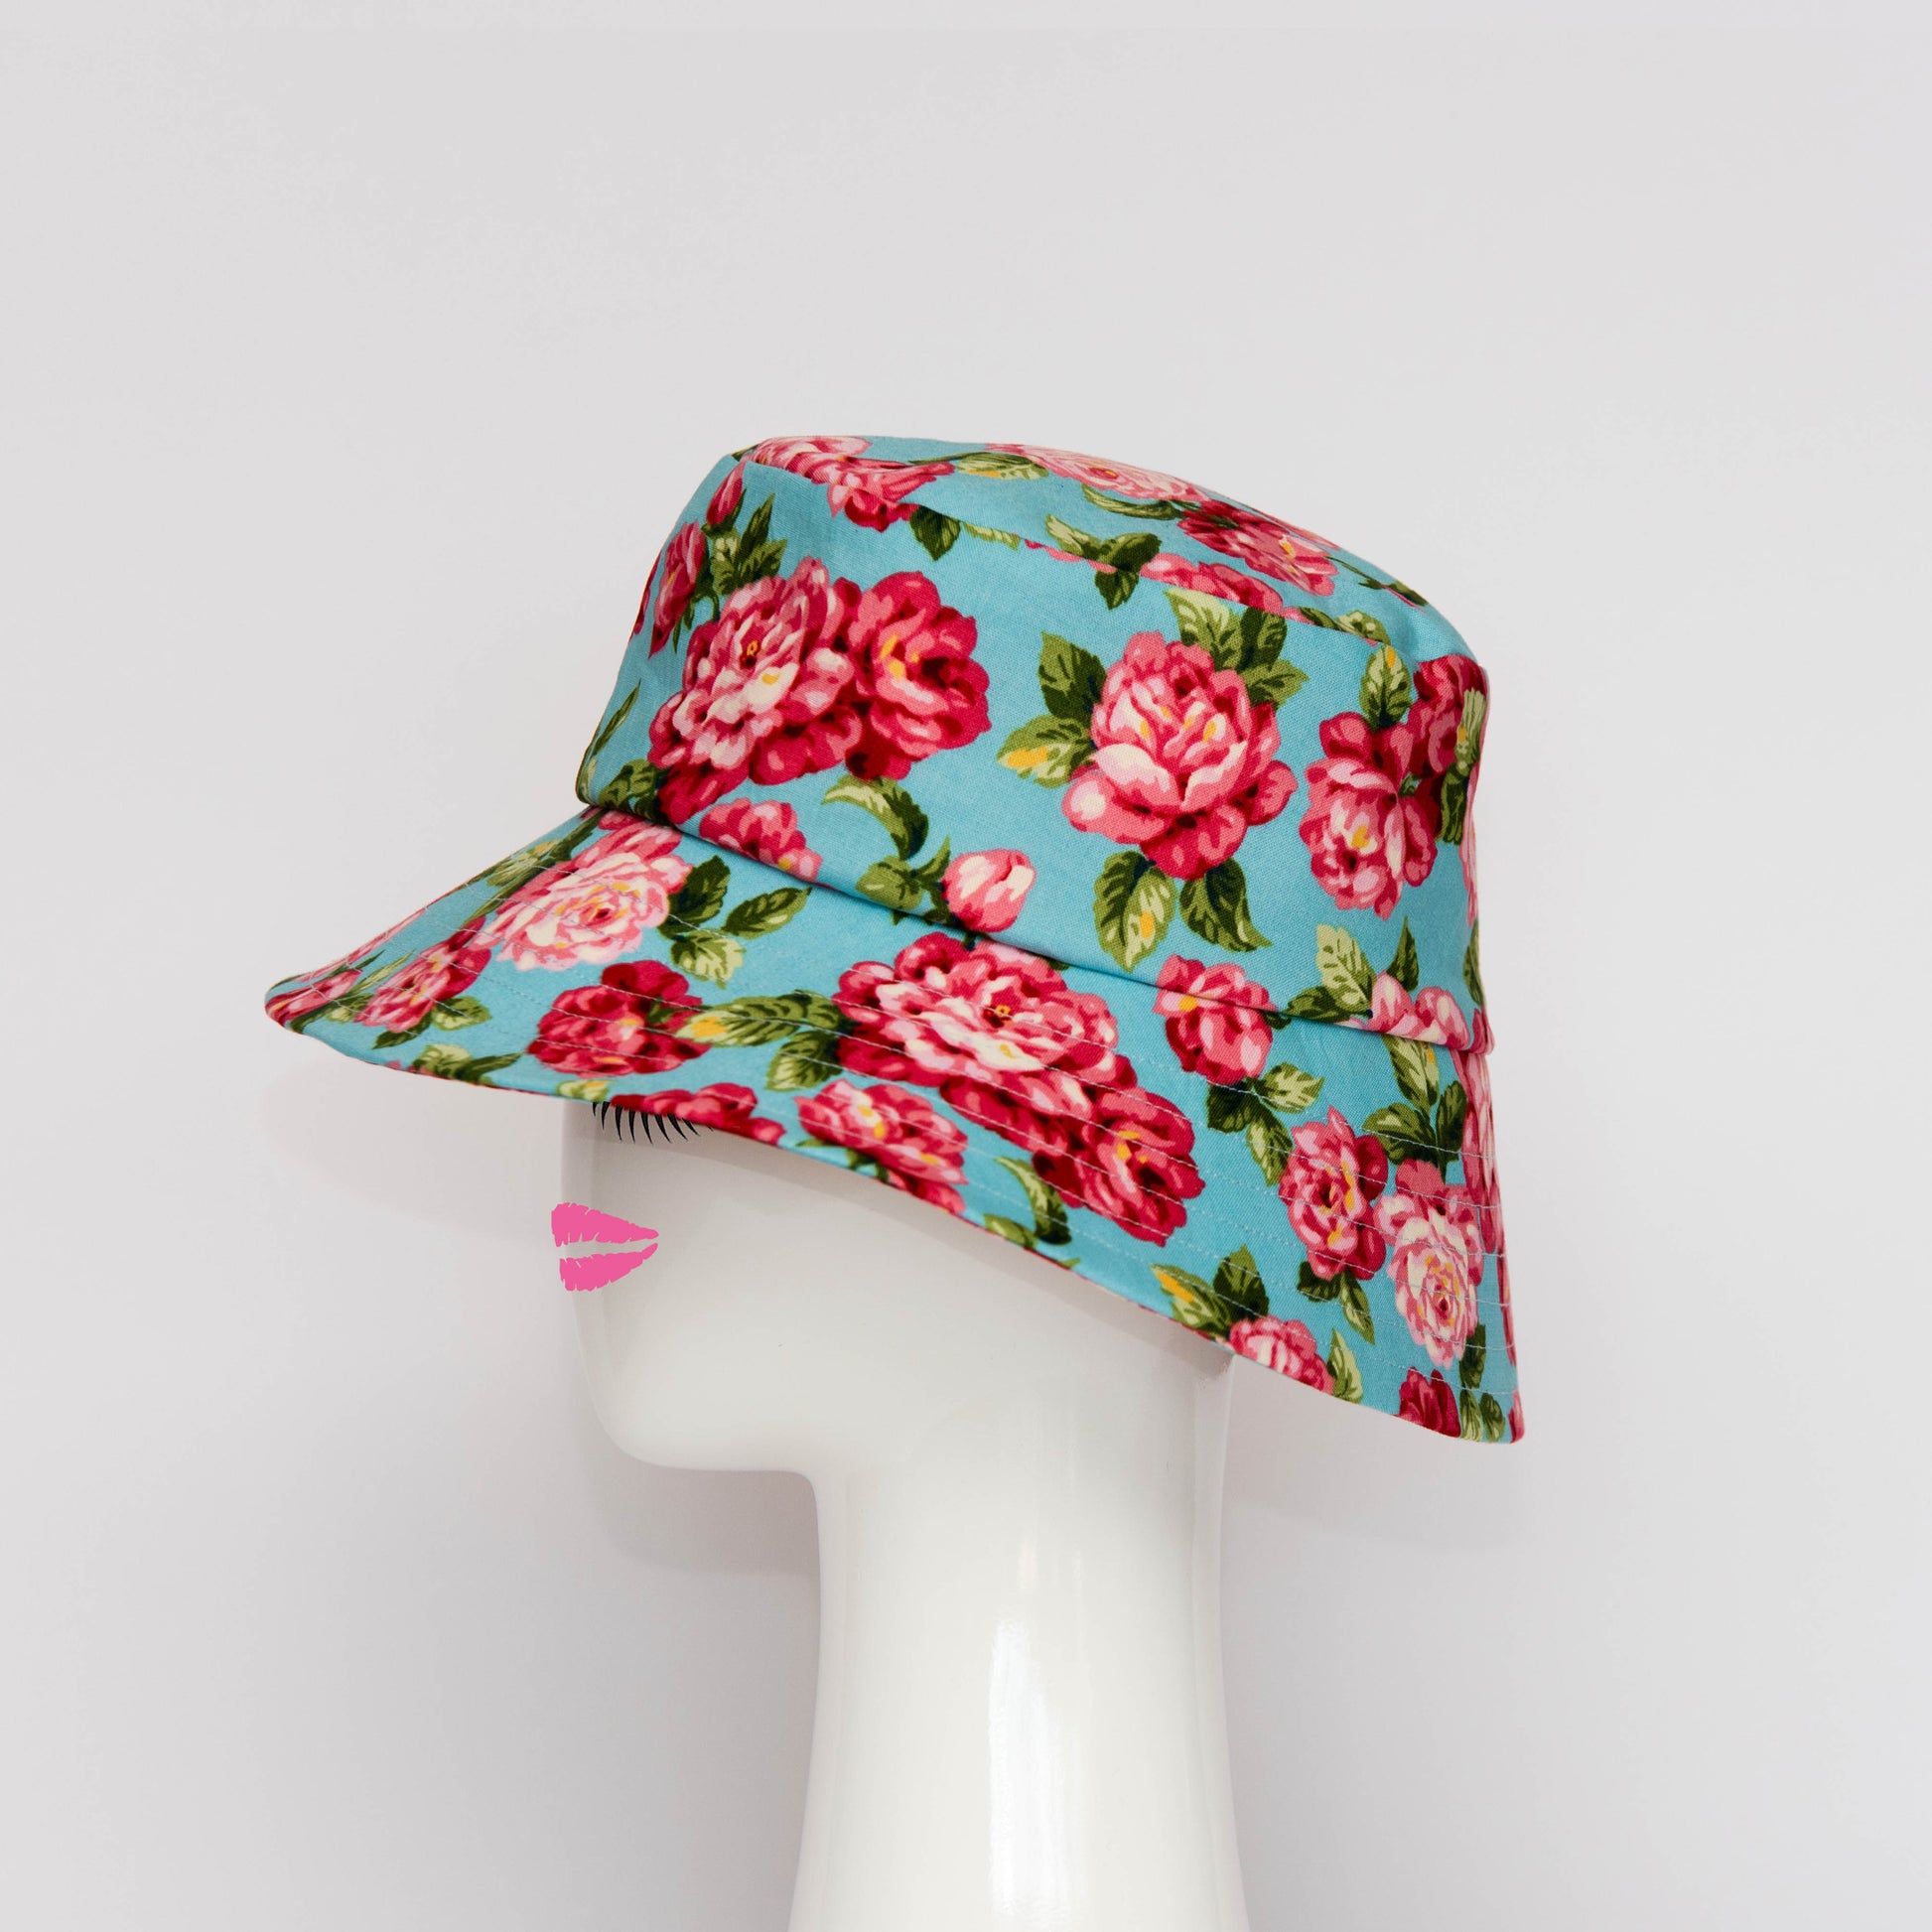 A side view of the Appin Bucket Hat in floral has a square shape crown with tip and side band.  Created by Melbourne based Lauren J Ritchie Millinery.